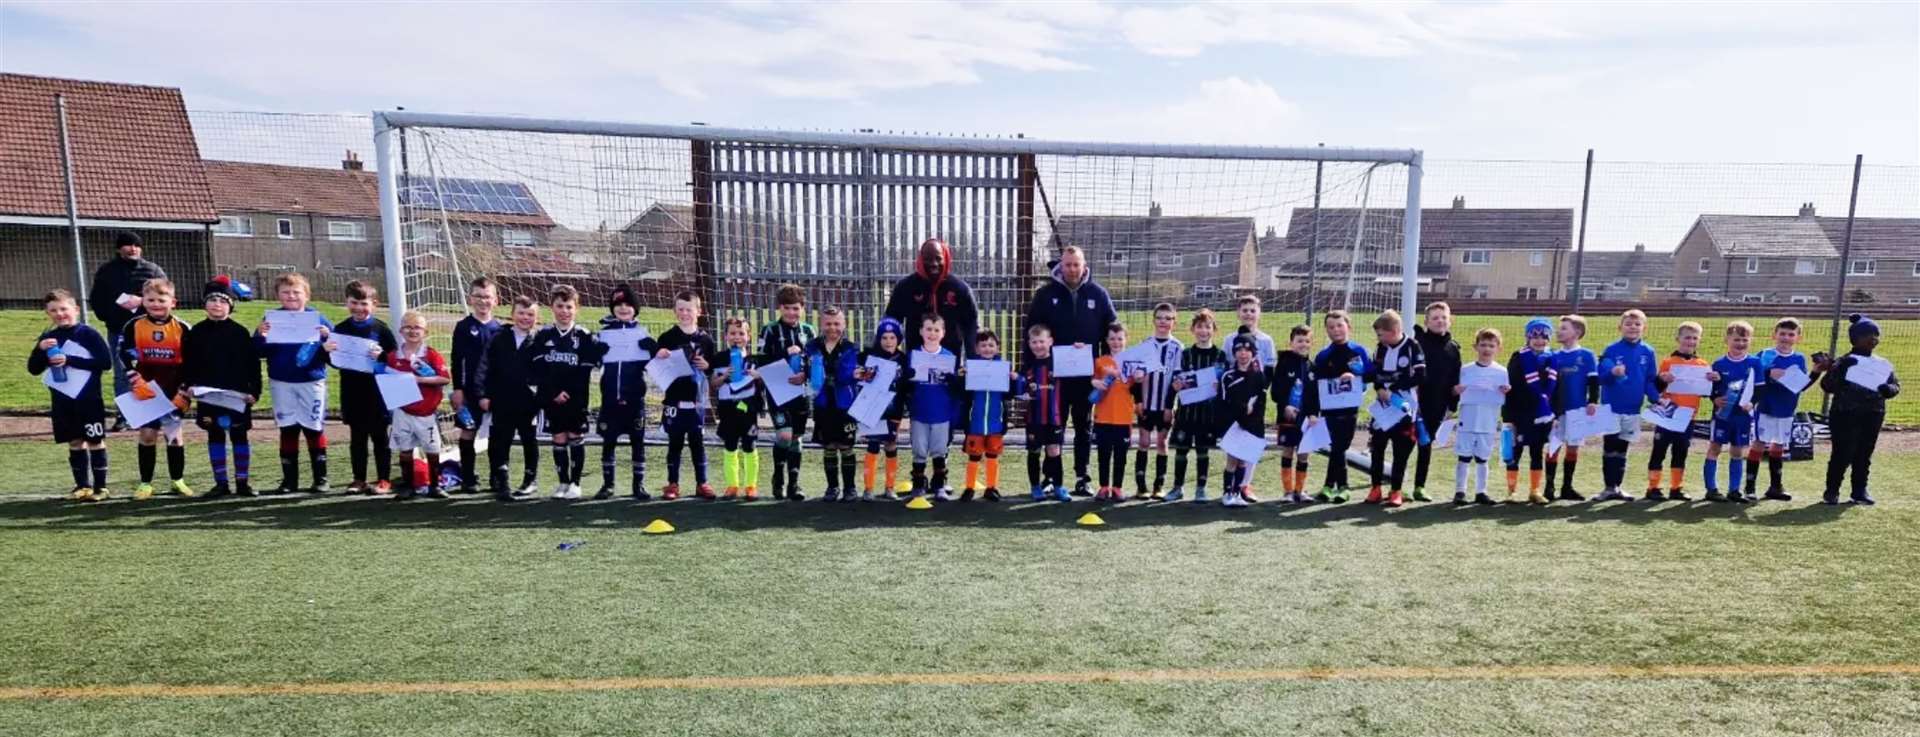 Youngsters in the 6-9 age group with Marvin Andrews and Stephen Wright.